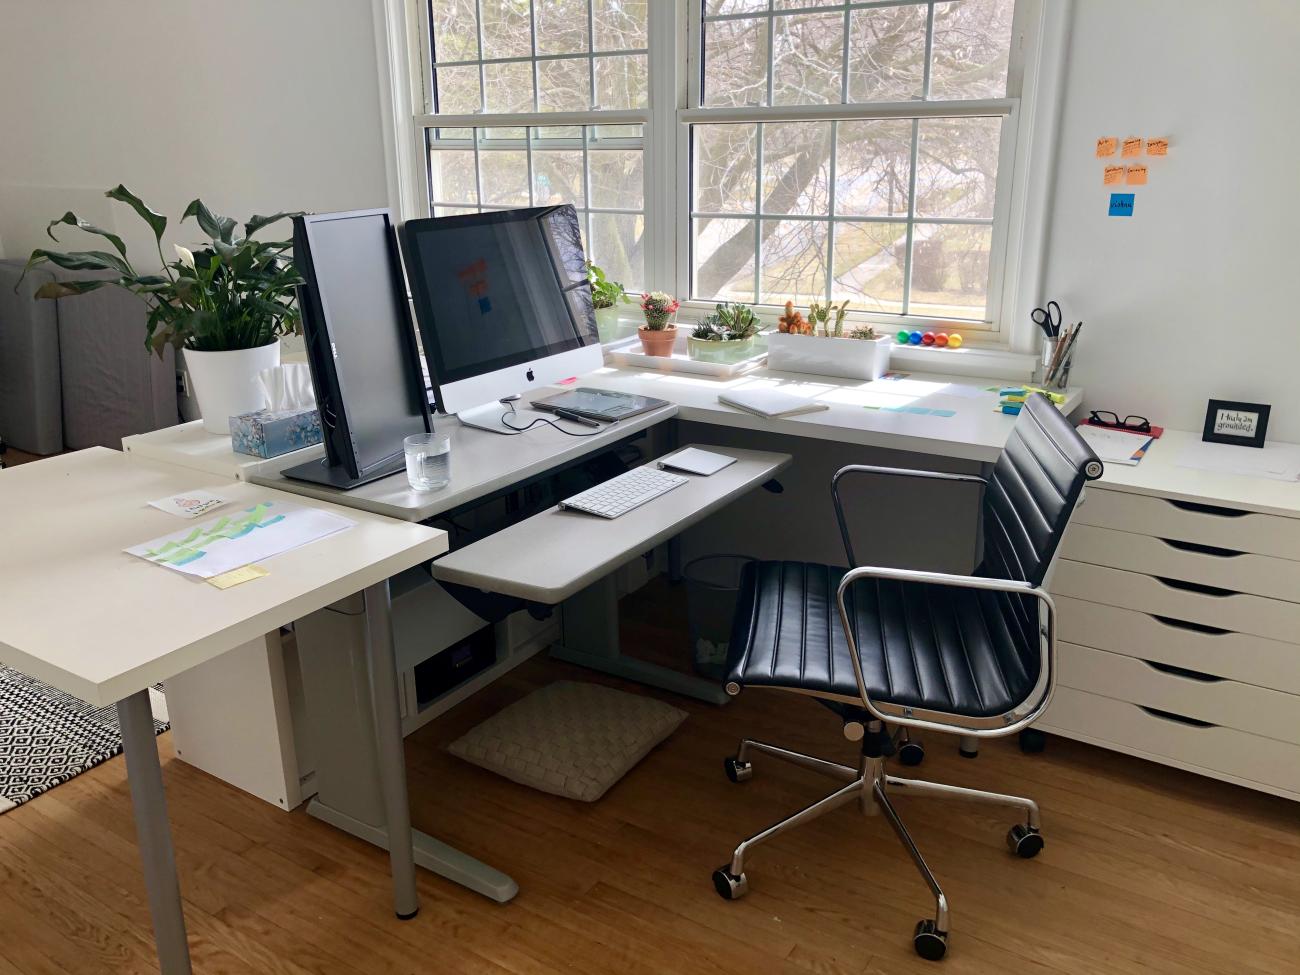 Patricia's home office includes an ergonomic desk and comfy chair